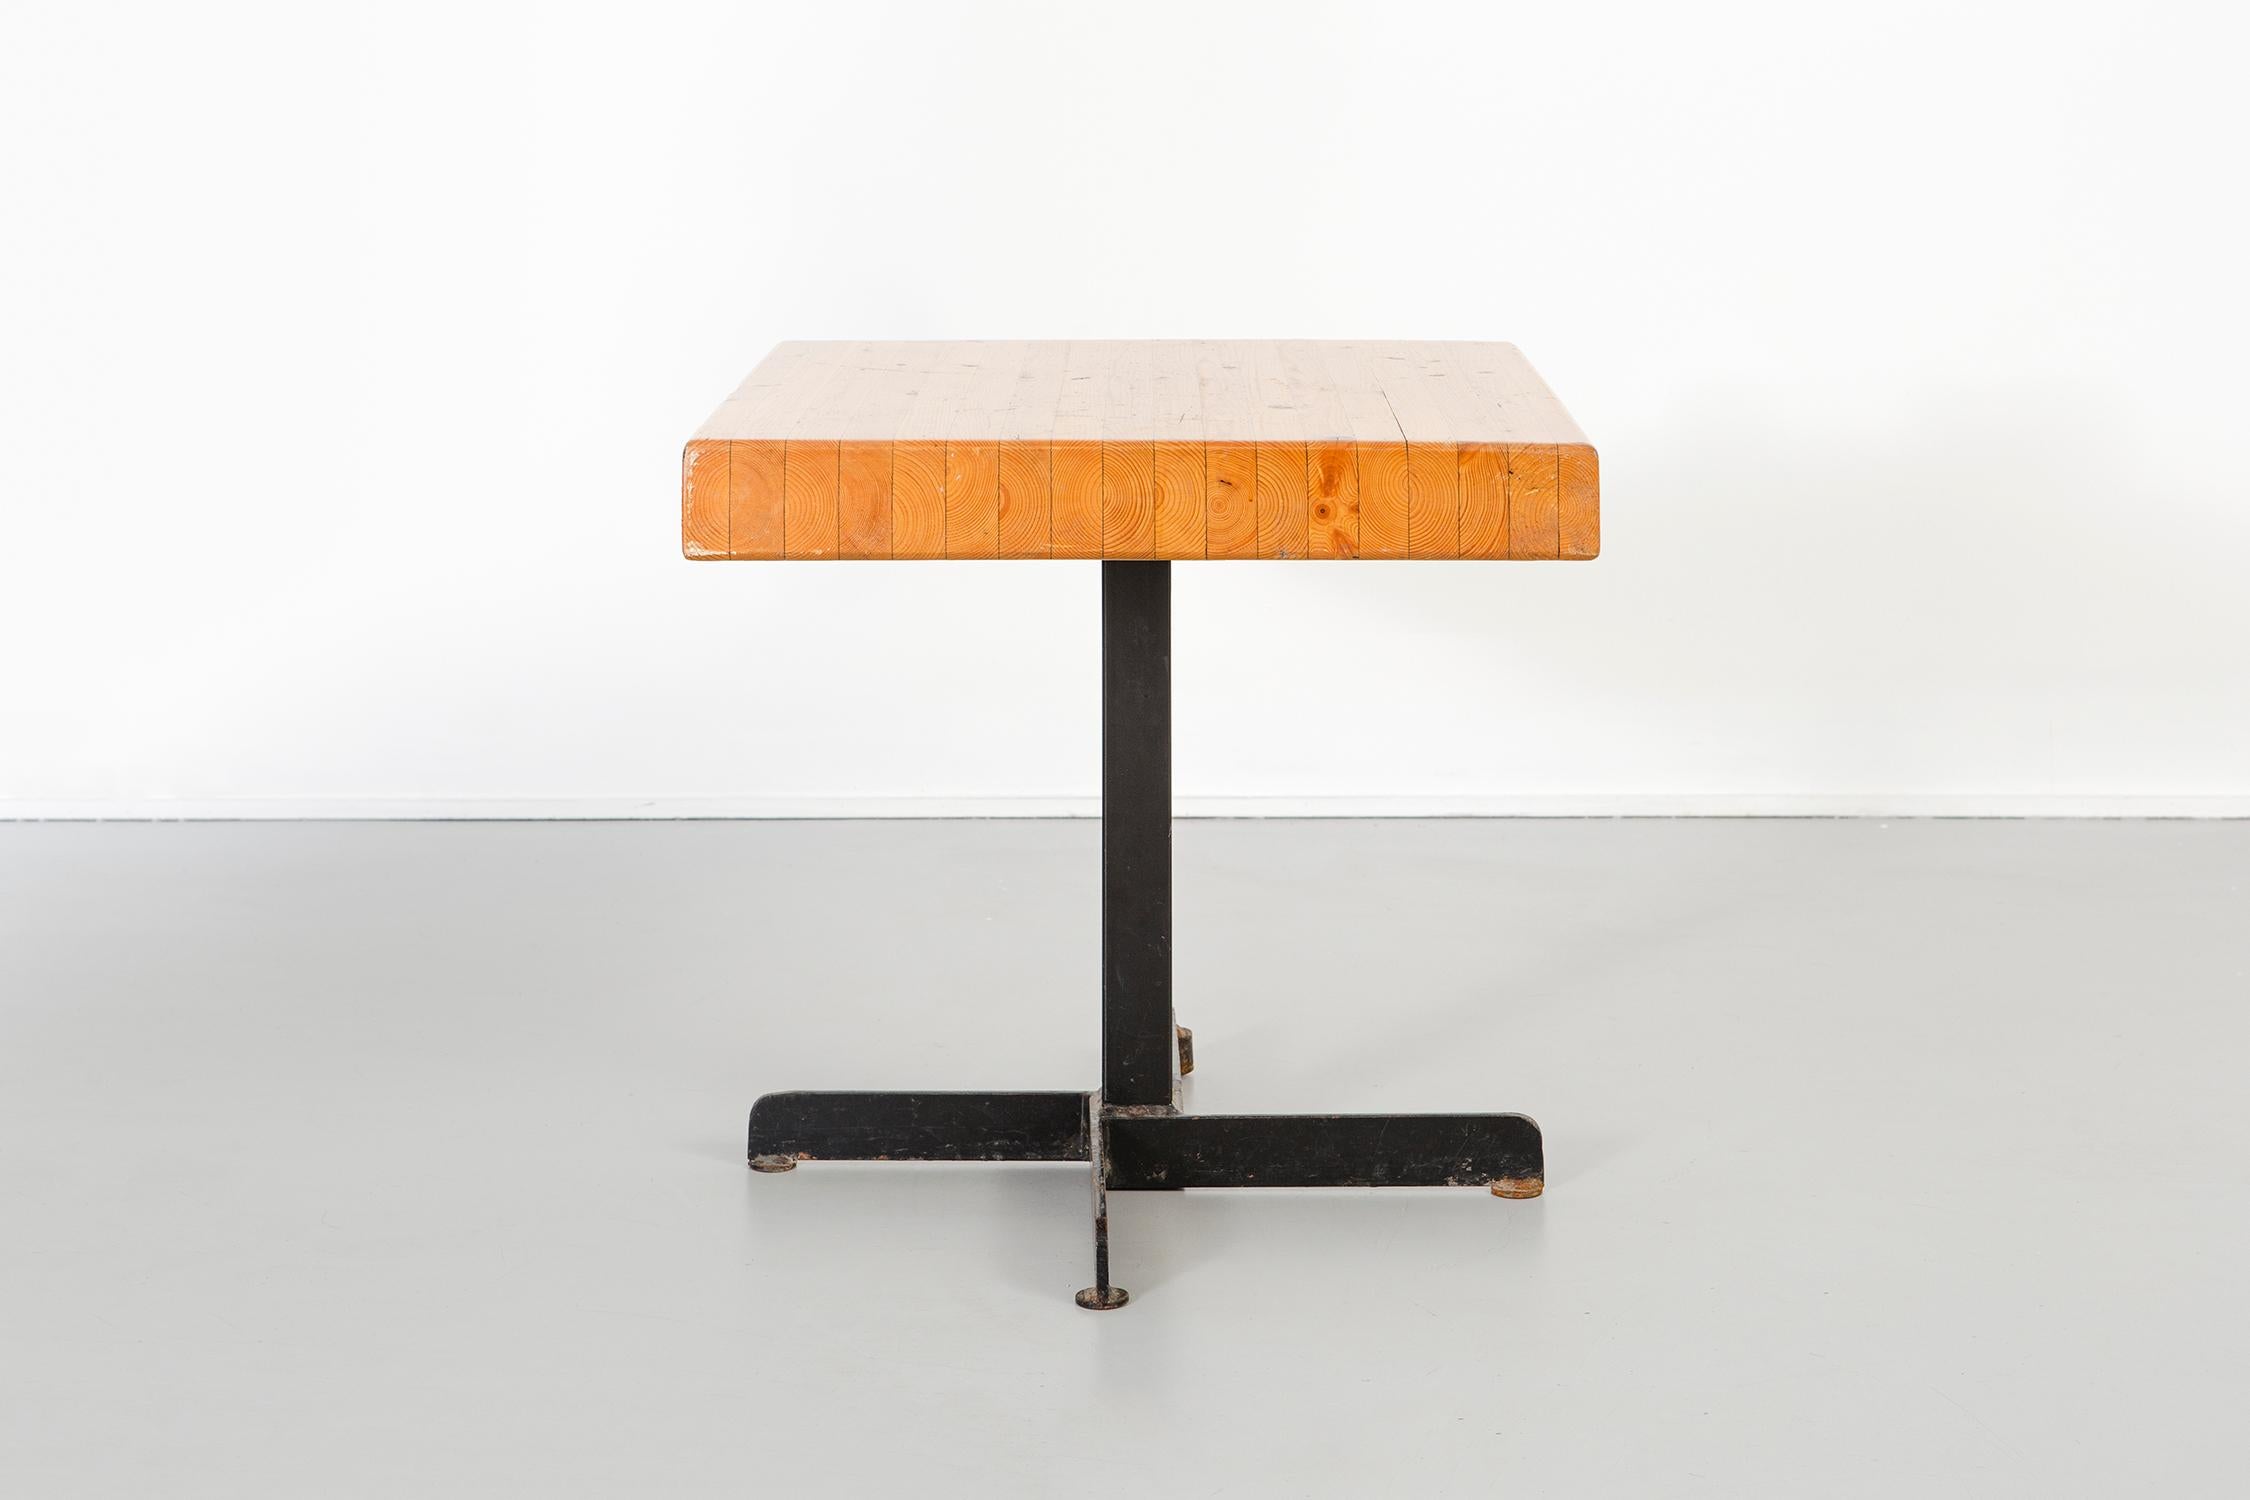 Square table

Designed by Charlotte Perriand for Les Arcs 2000

France, circa 1968

Enameled steel and pine

Measures: 29 ?” H x 23 ½” W x 22 ¾” D

Table height can be adjusted; this particular form was utilized in many Les Arcs residences